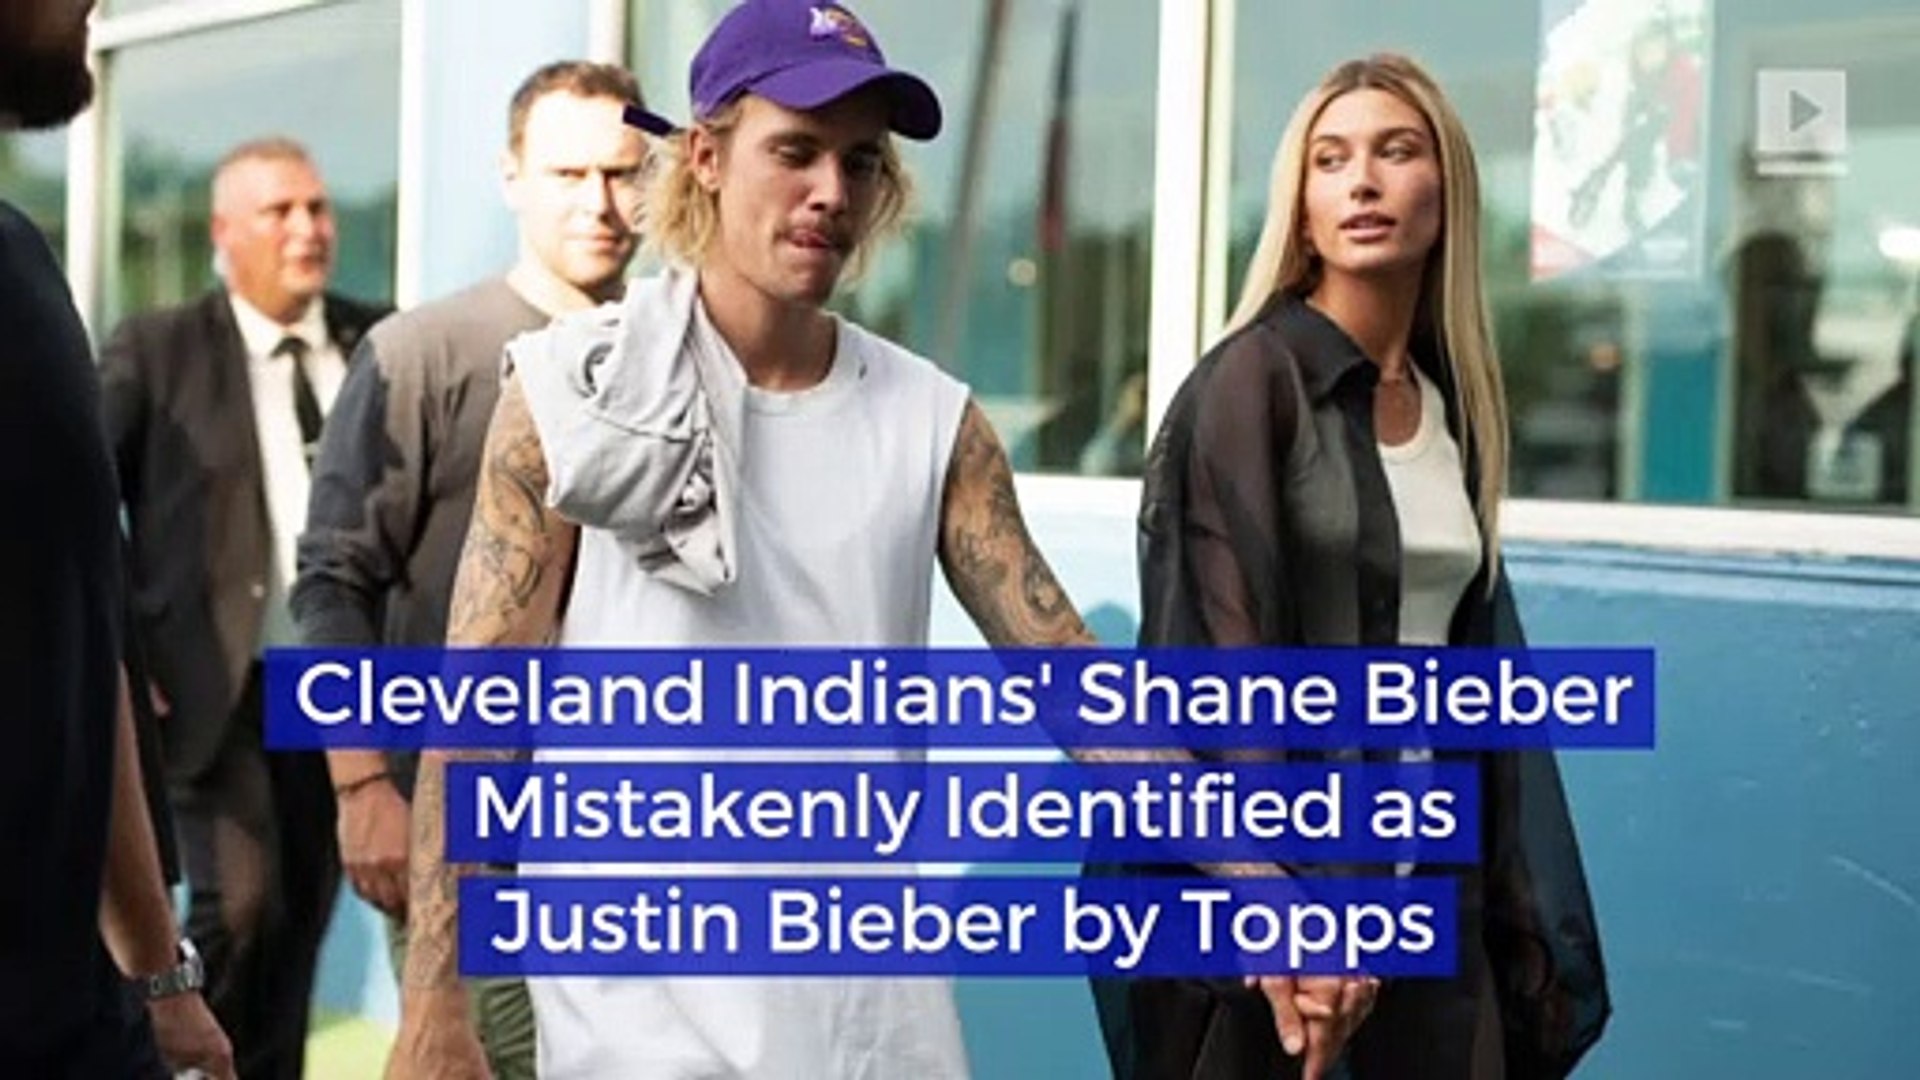 Justin Bieber and Indians' Shane Bieber tweeted at each other